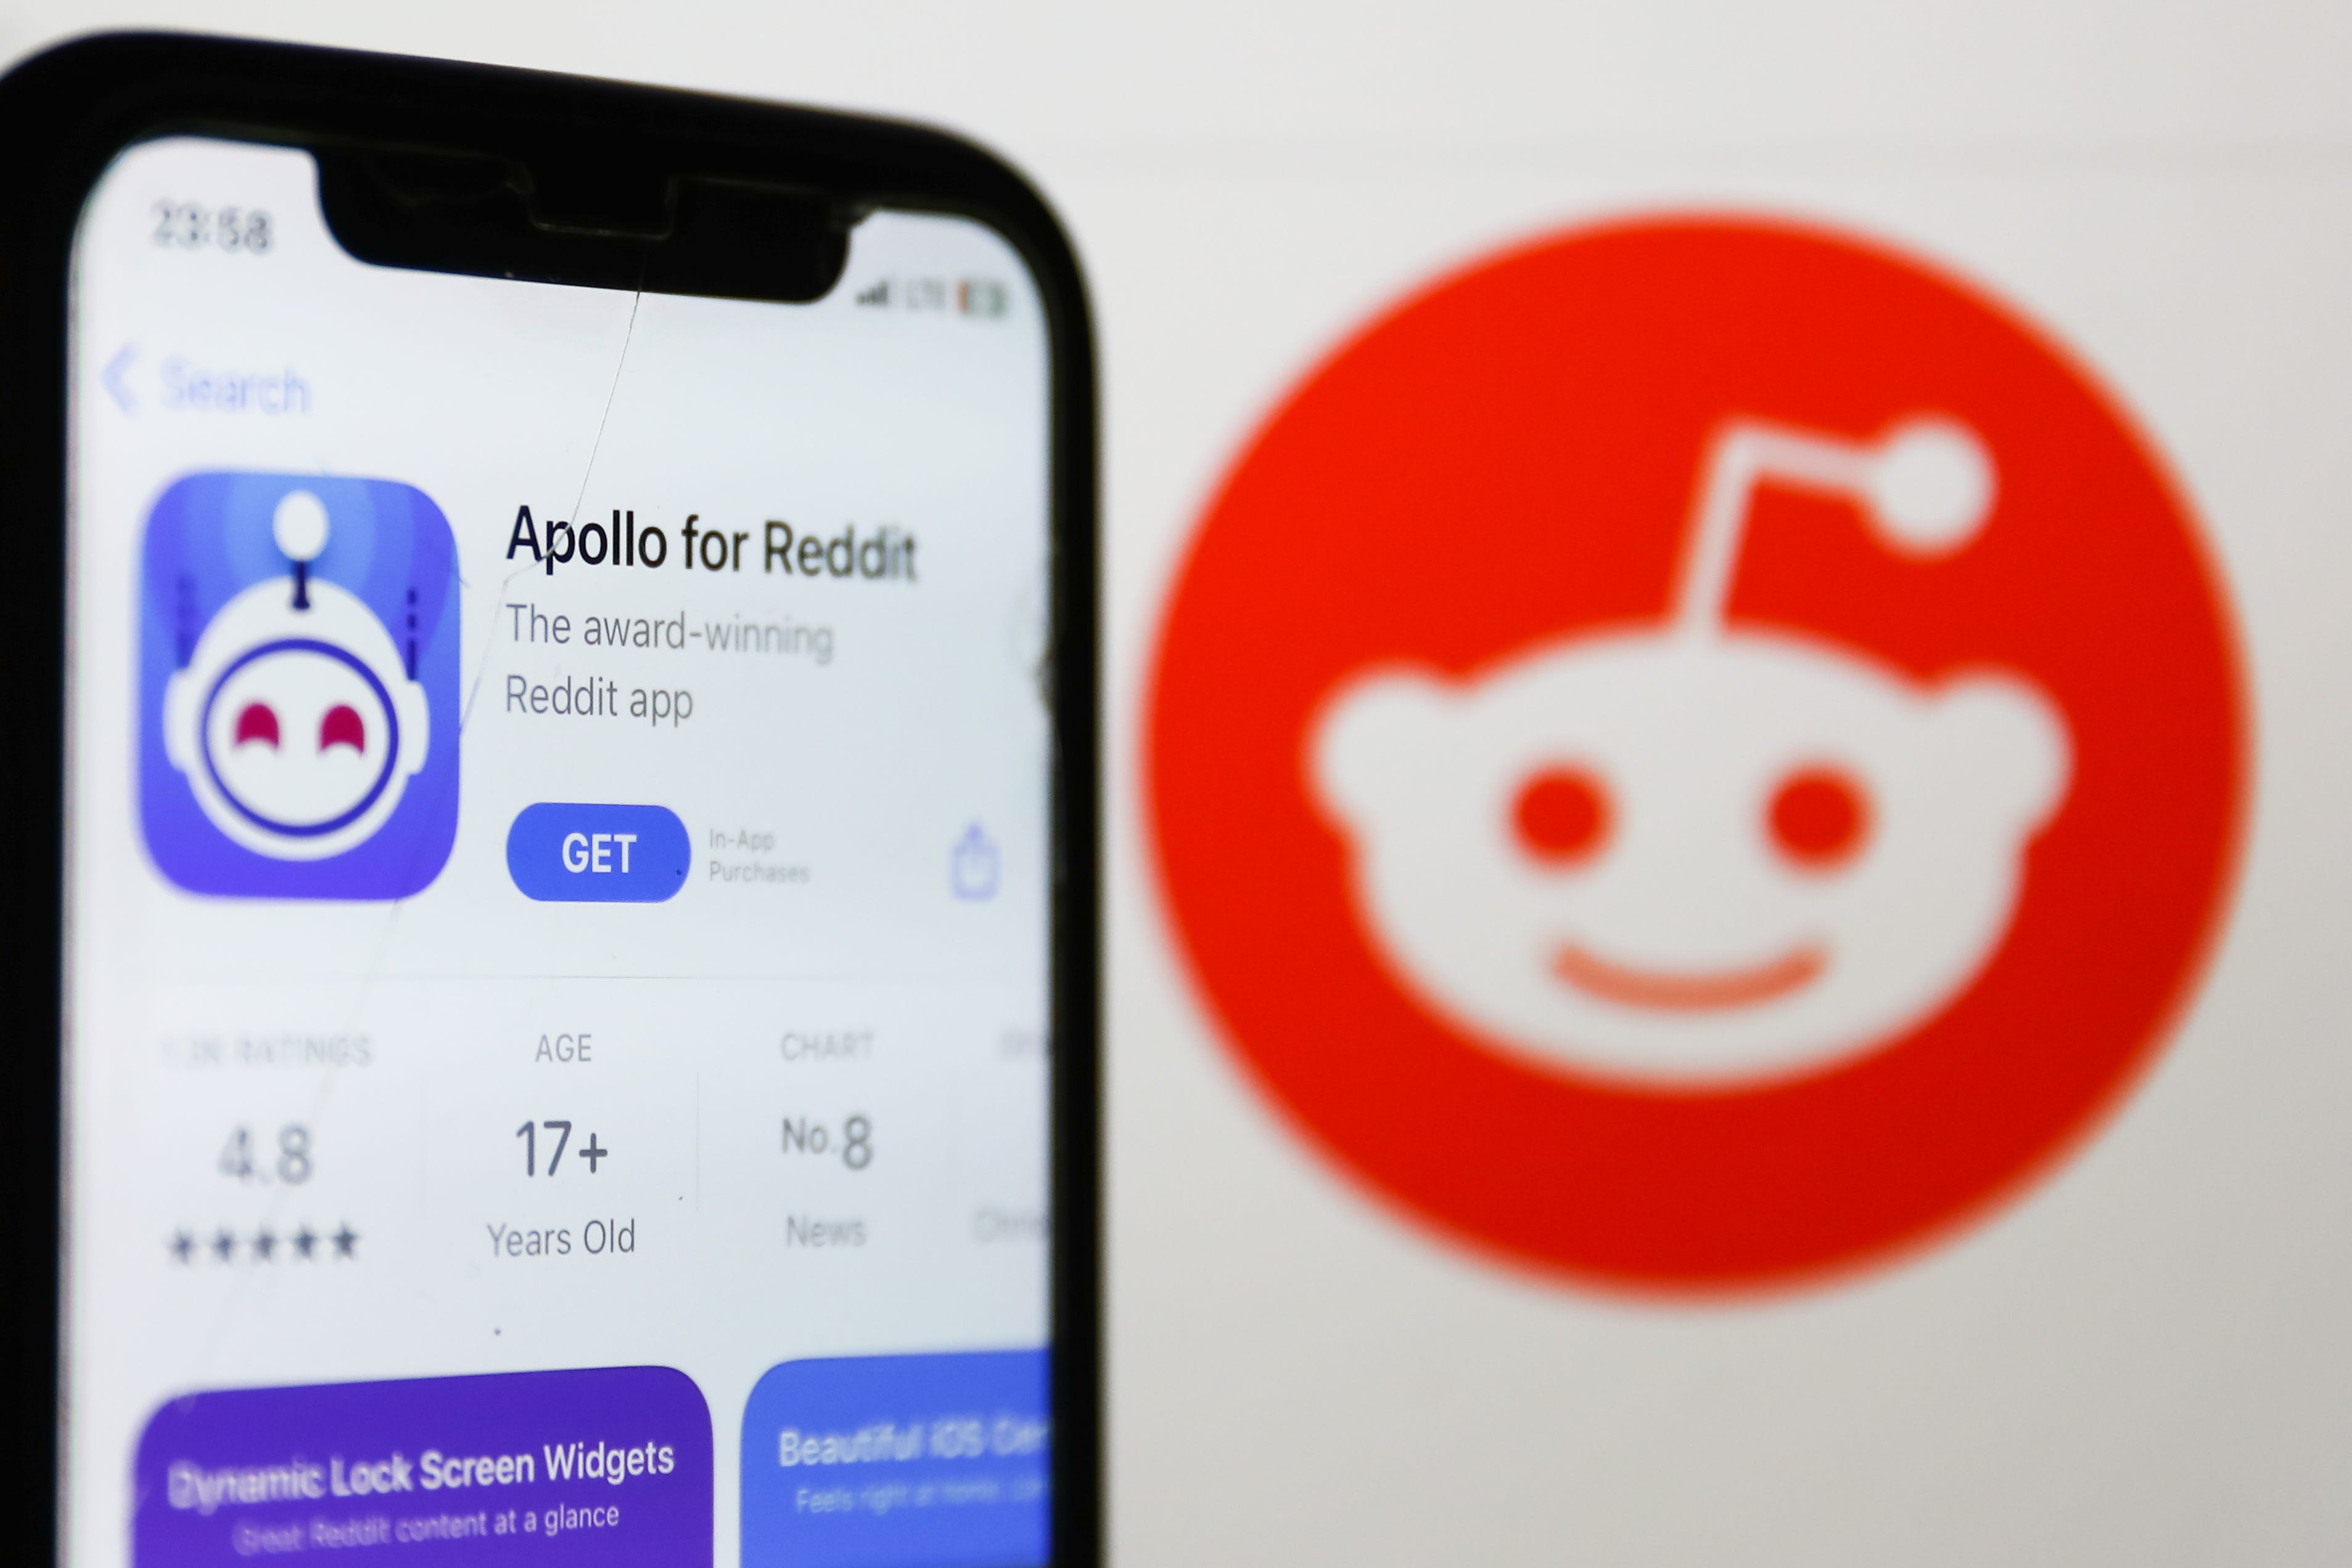 What we're learning from the Reddit blackout